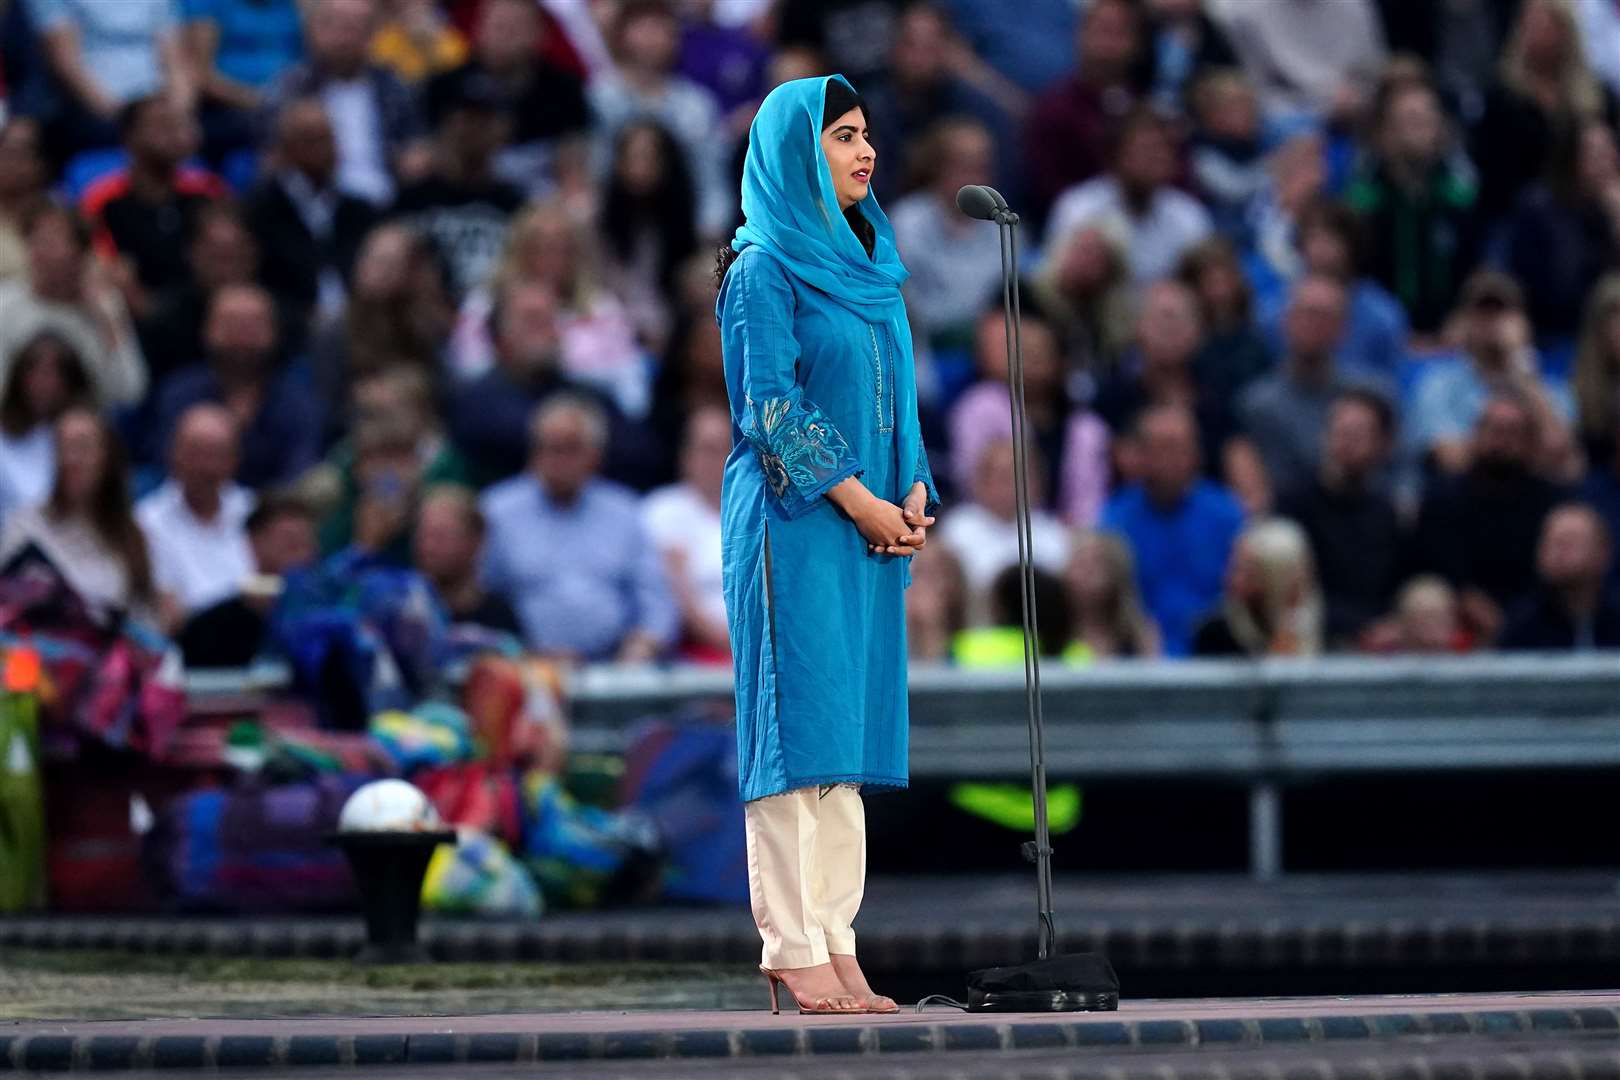 Activist Malala Yousafzai, who settled in Birmingham when she came to the UK, addresses the crowd (David Davies/PA)